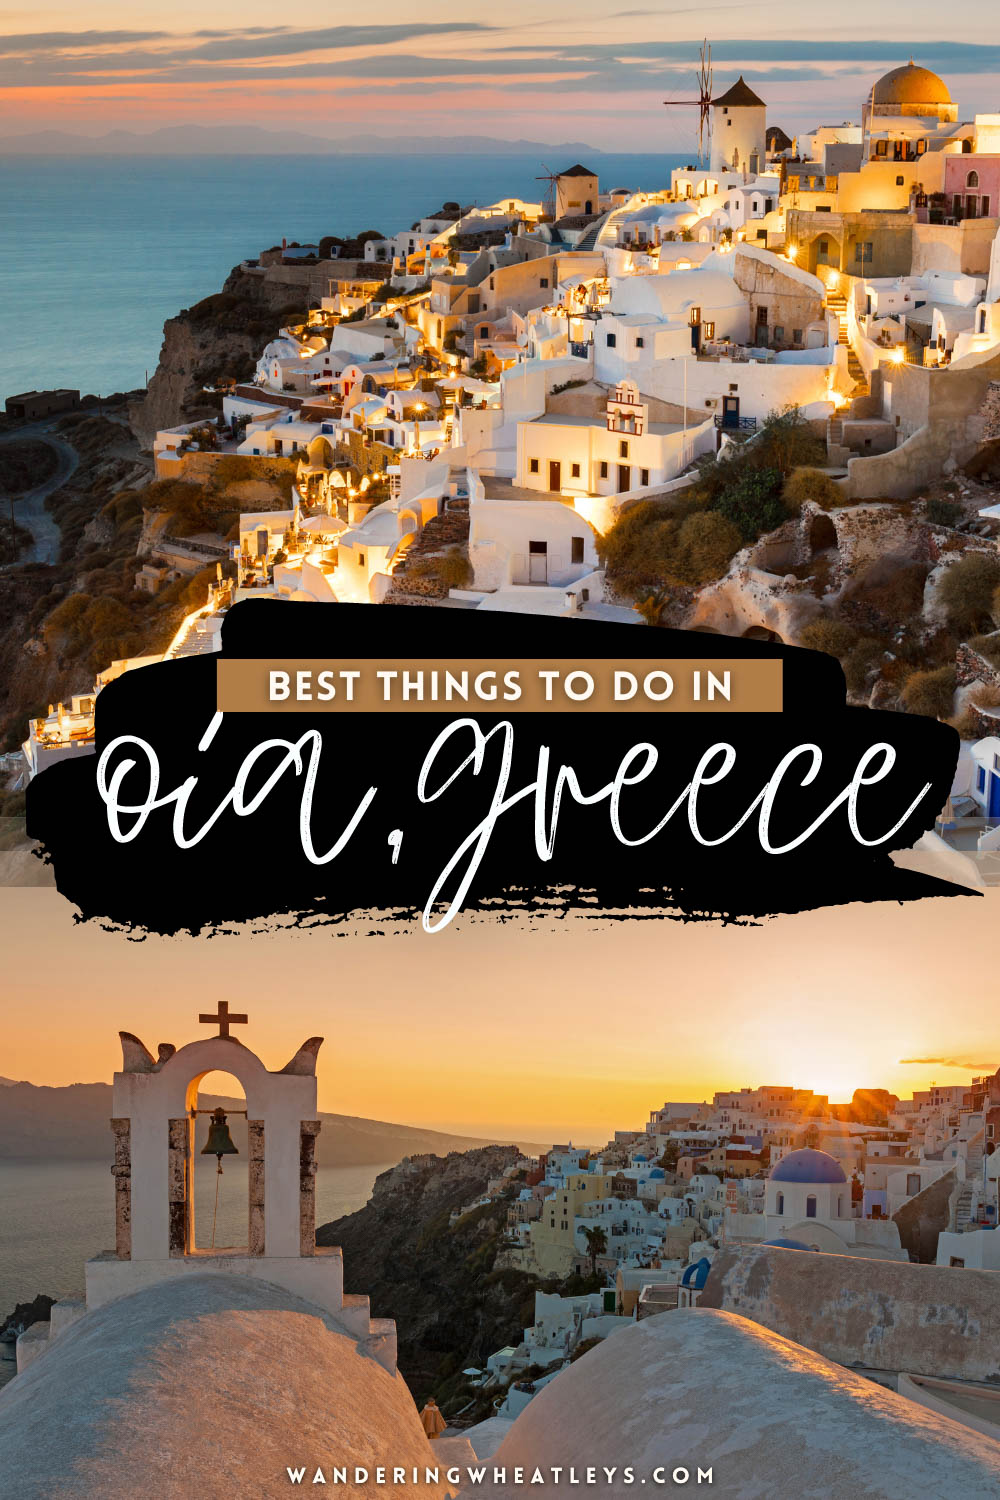 The Best Things to do in Oia, Greece